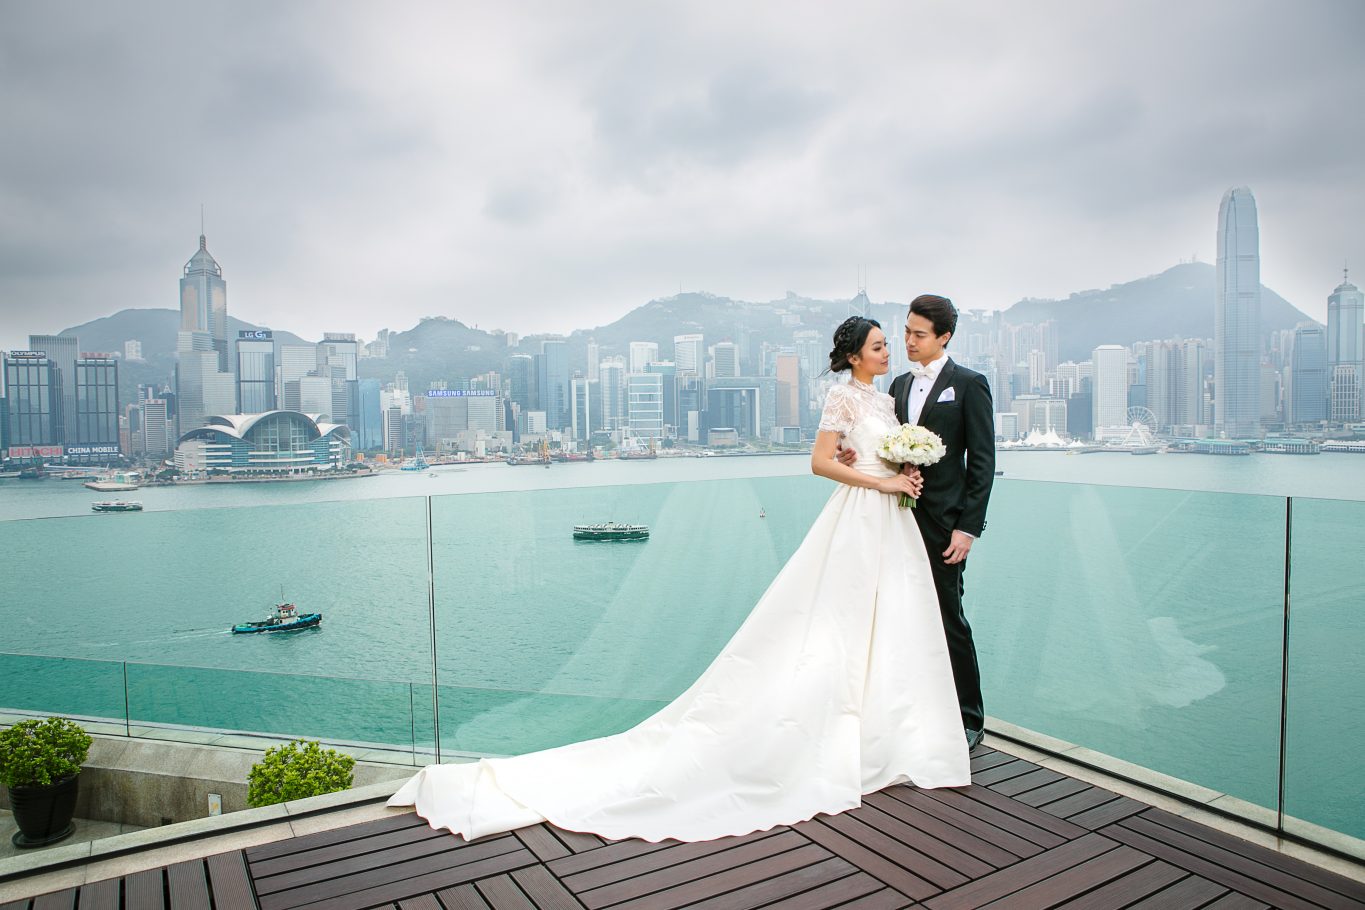 Commercial Photography, Intercontinental hotel, Wedding photography